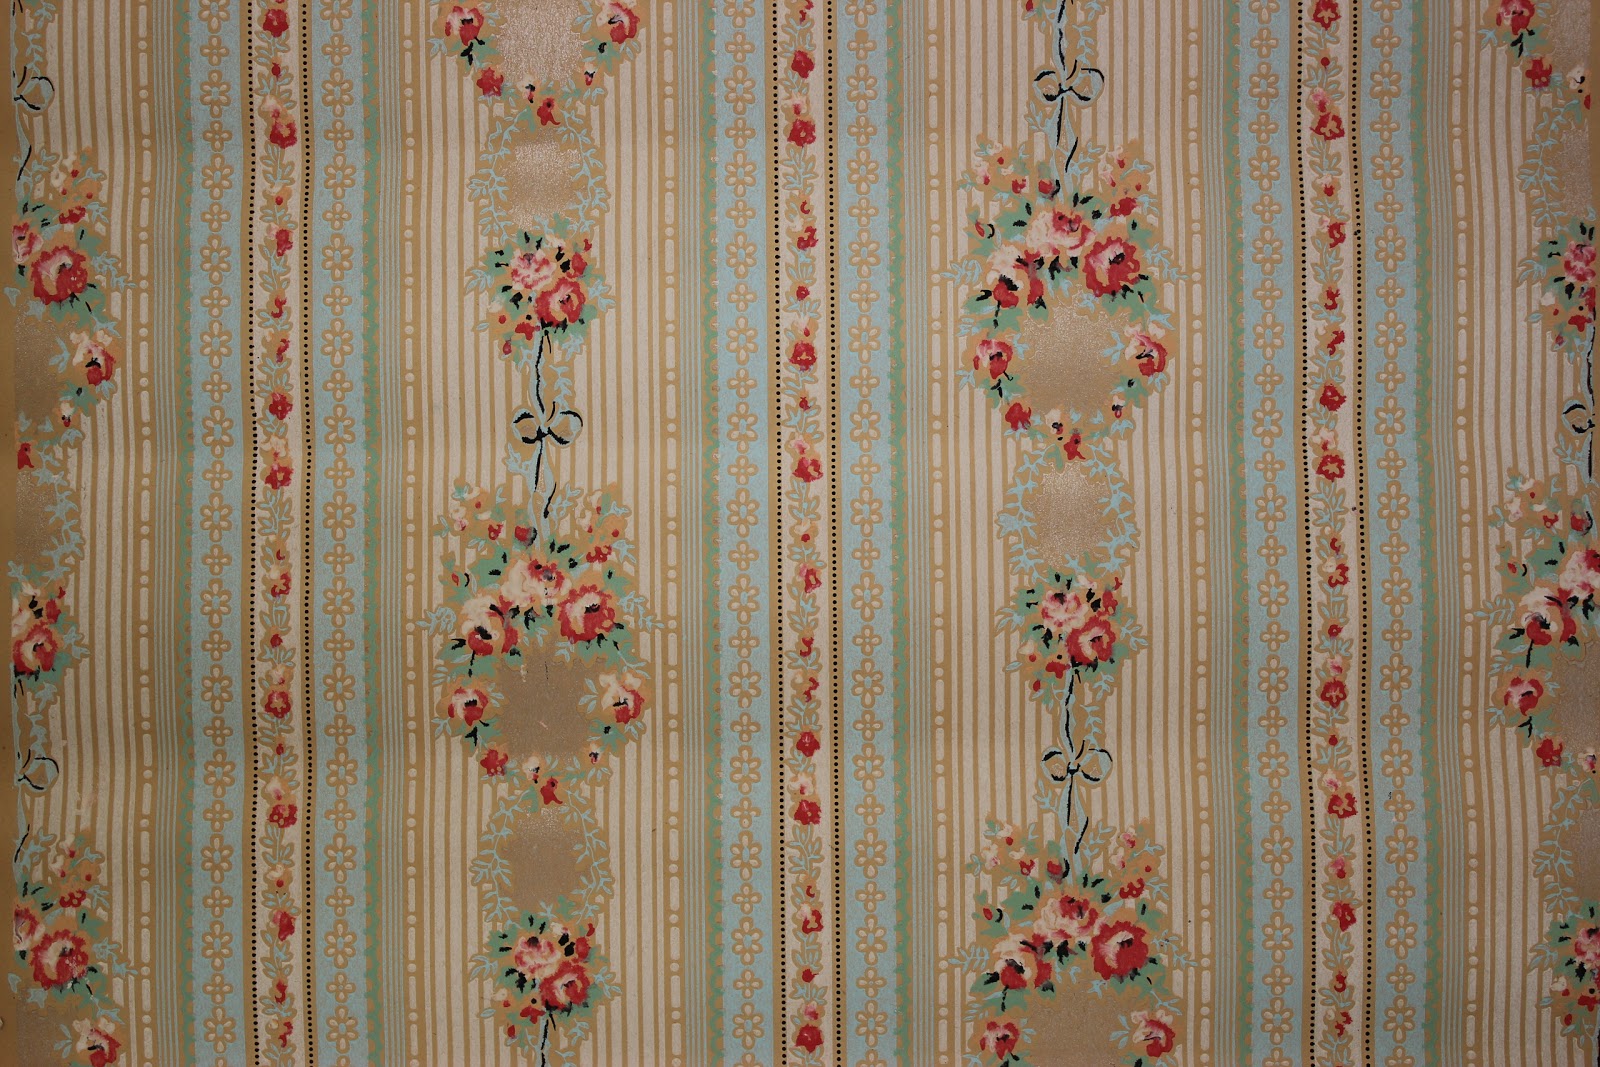 1930s Fabric Wallpaper and Home Decor  Spoonflower